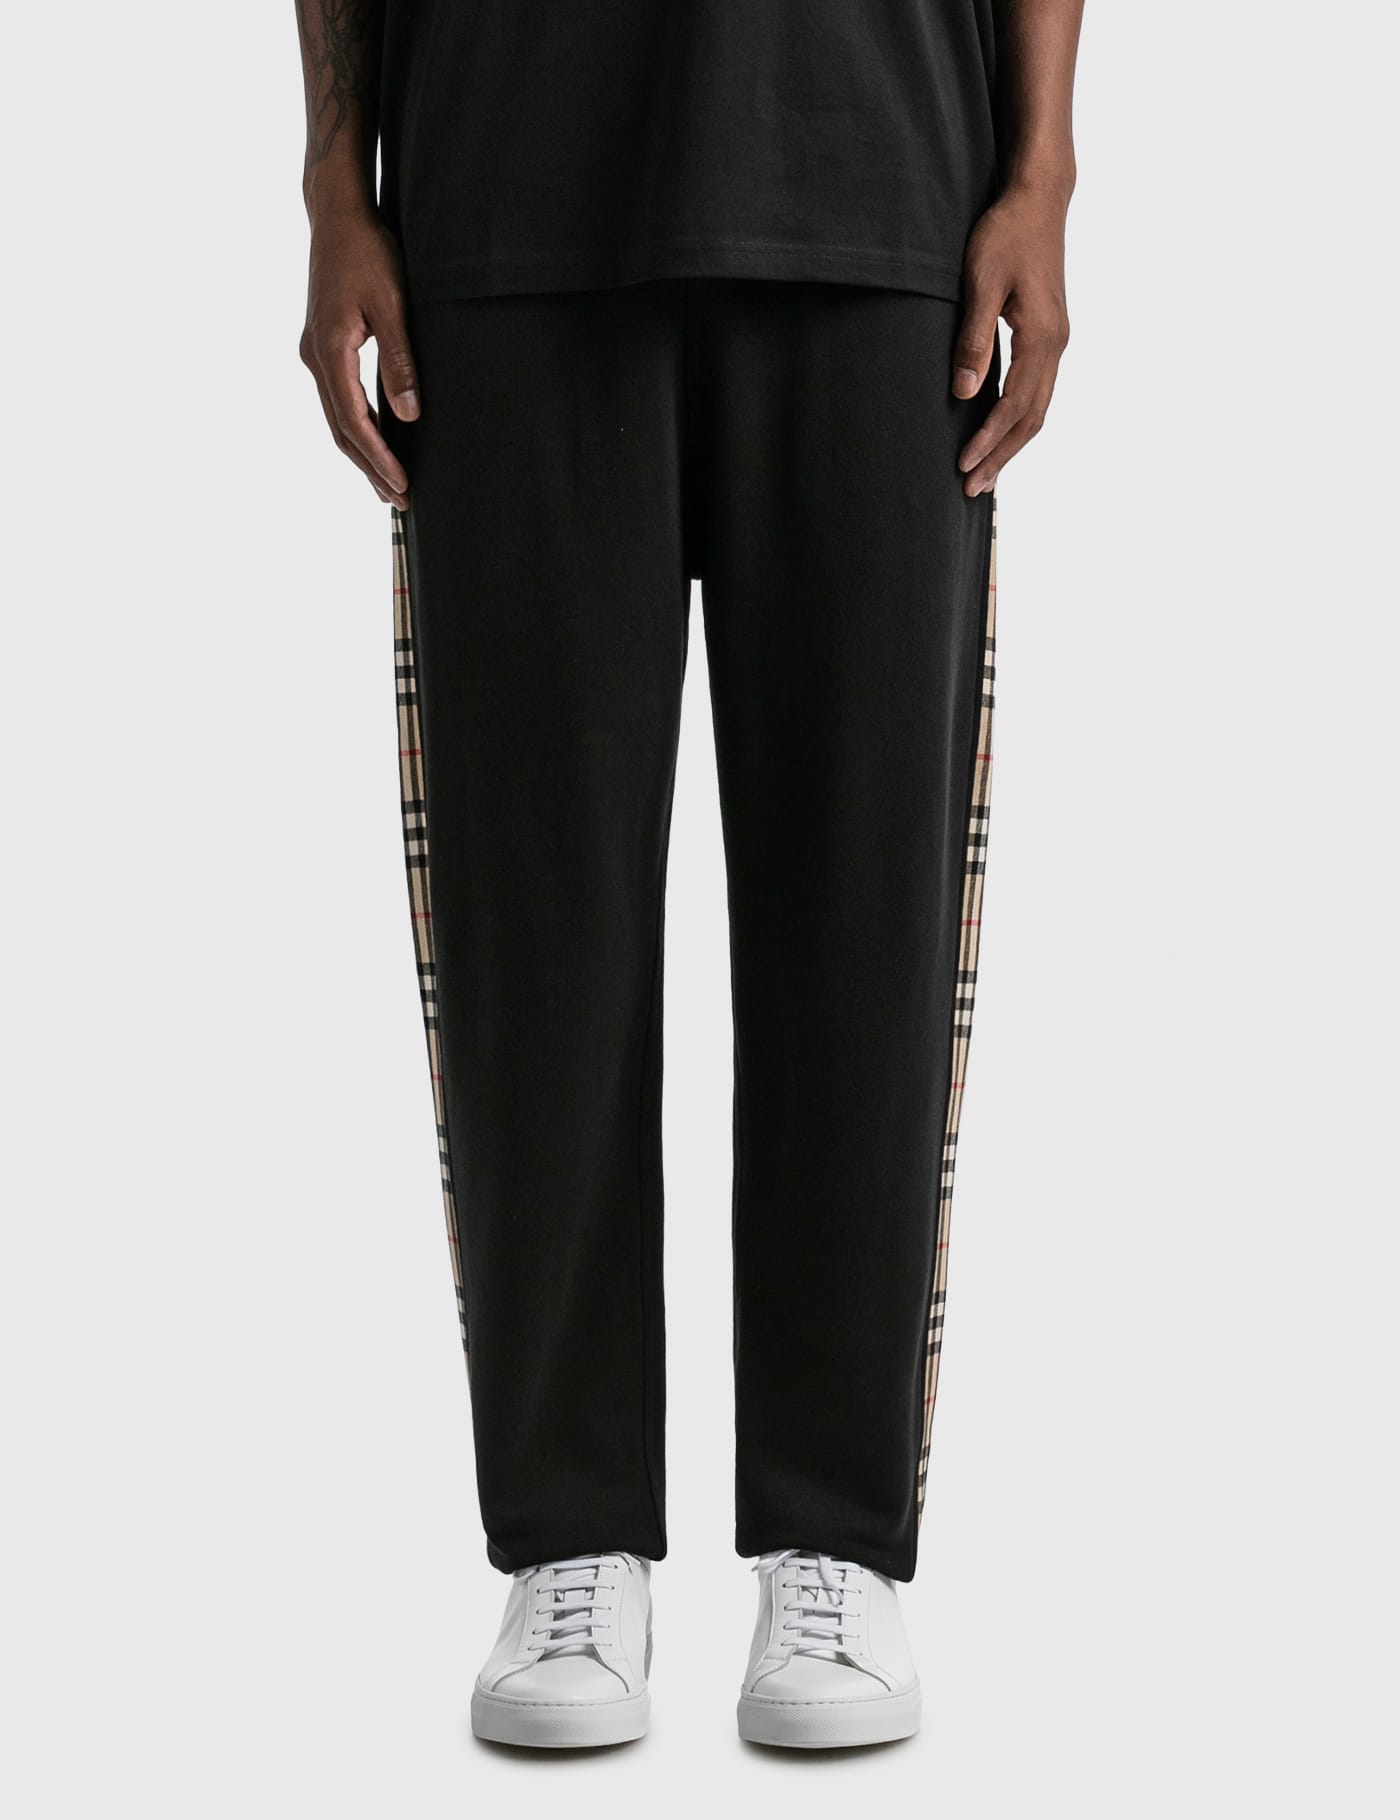 Rotol - Franken Cargo Pants | HBX - Globally Curated Fashion and 